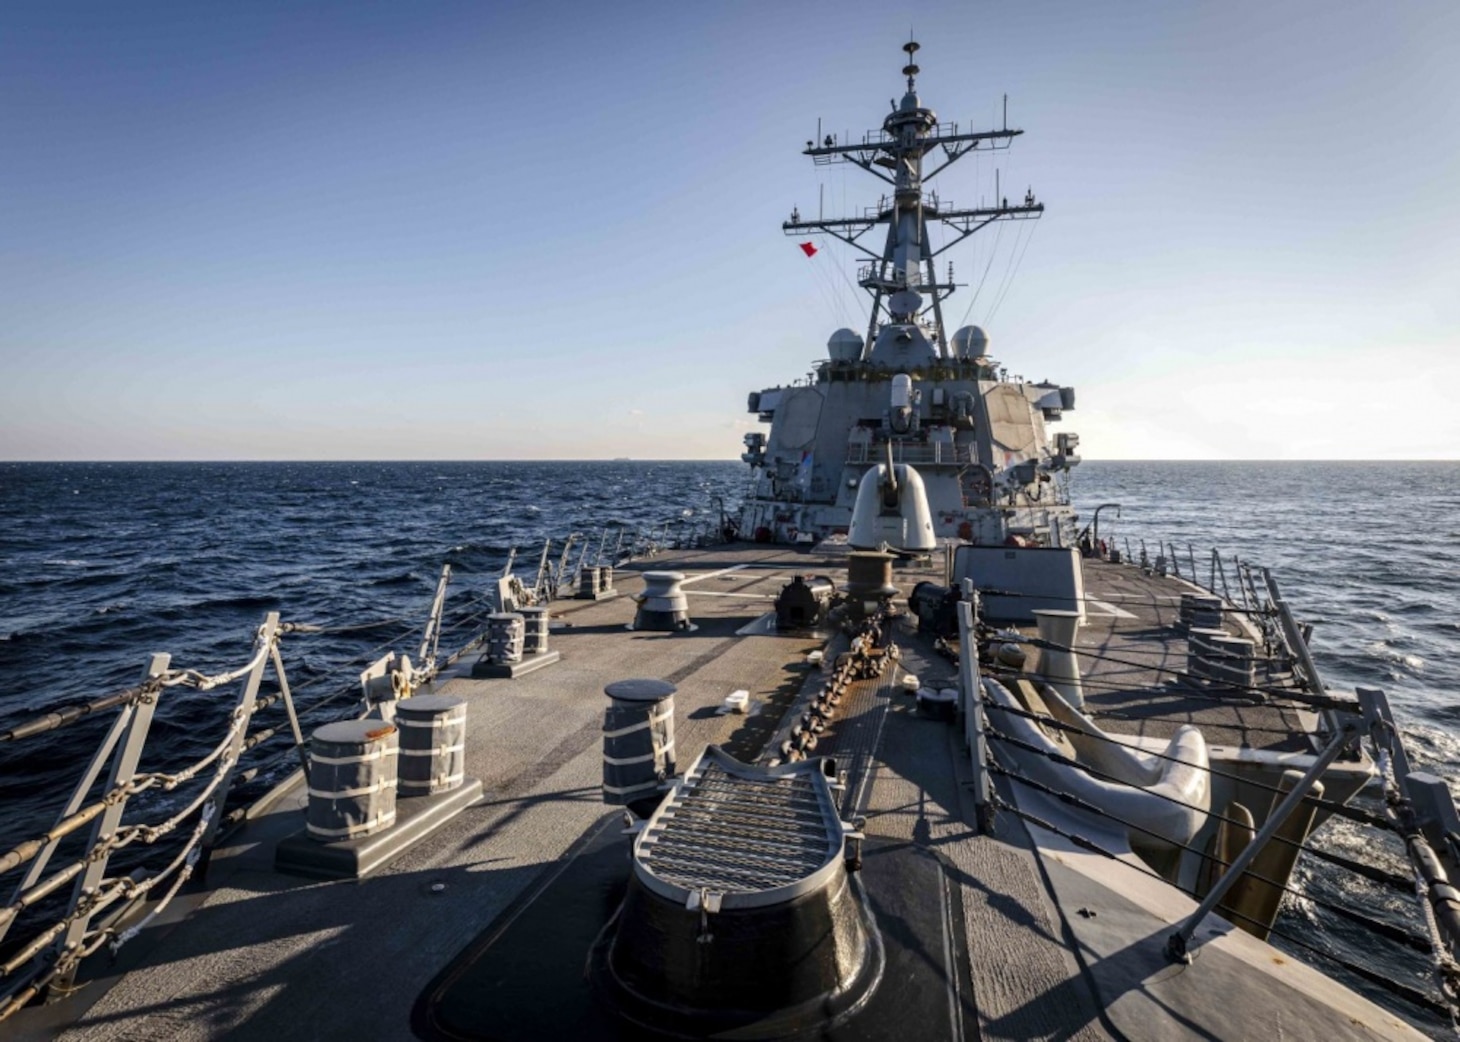 The Arleigh Burke-class guided-missile destroyer USS John S. McCain (DDG 56) transits through Peter the Great Bay while conducting routine underway operations. McCain is forward-deployed to the U.S. 7th Fleet area of operations in support of security and stability in the Indo-Pacific region.